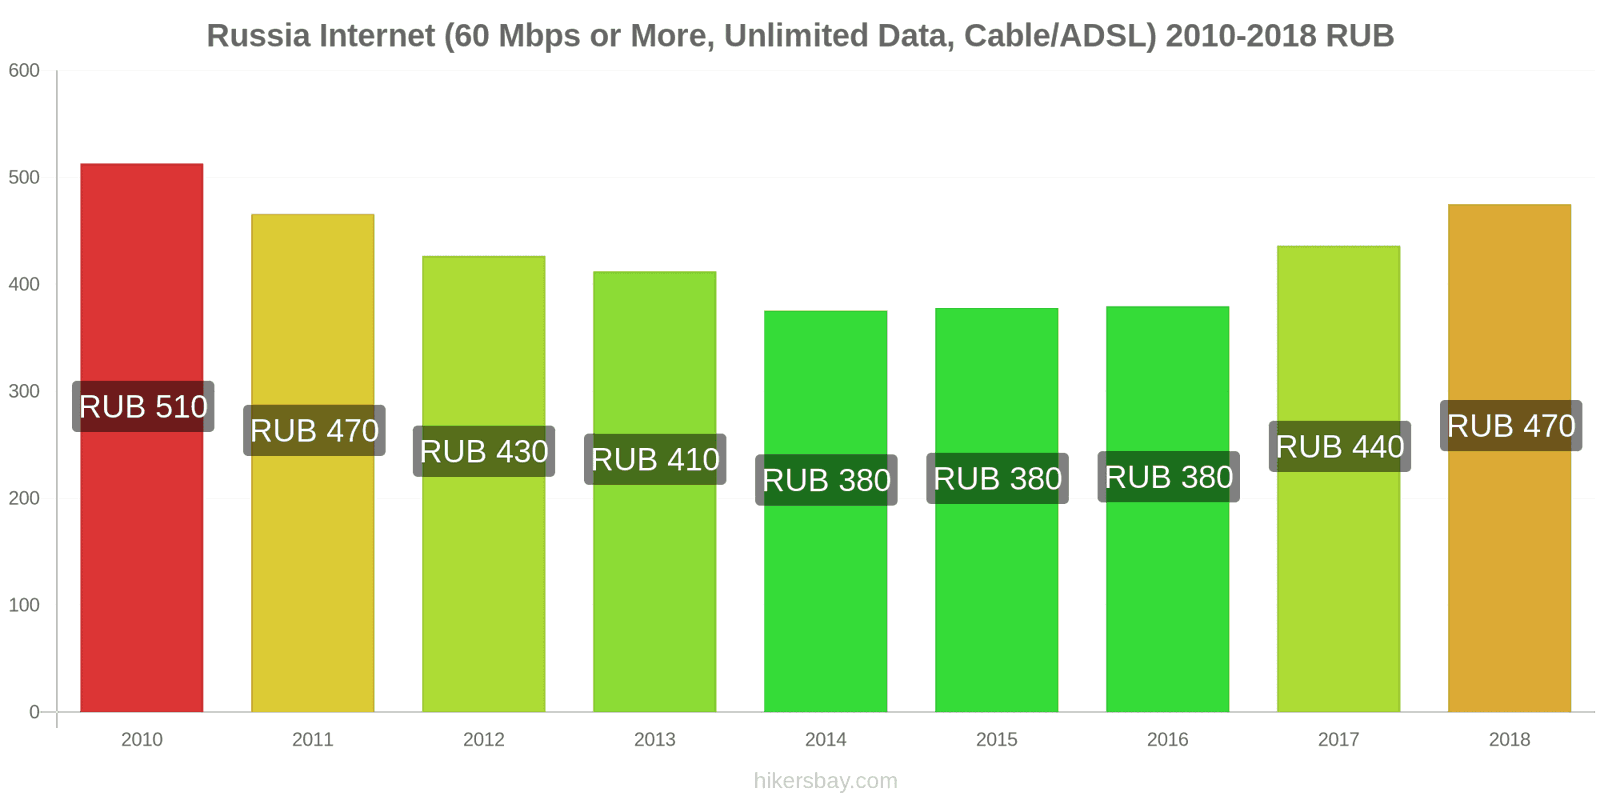 Russia price changes Internet (60 Mbps or more, unlimited data, cable/ADSL) hikersbay.com